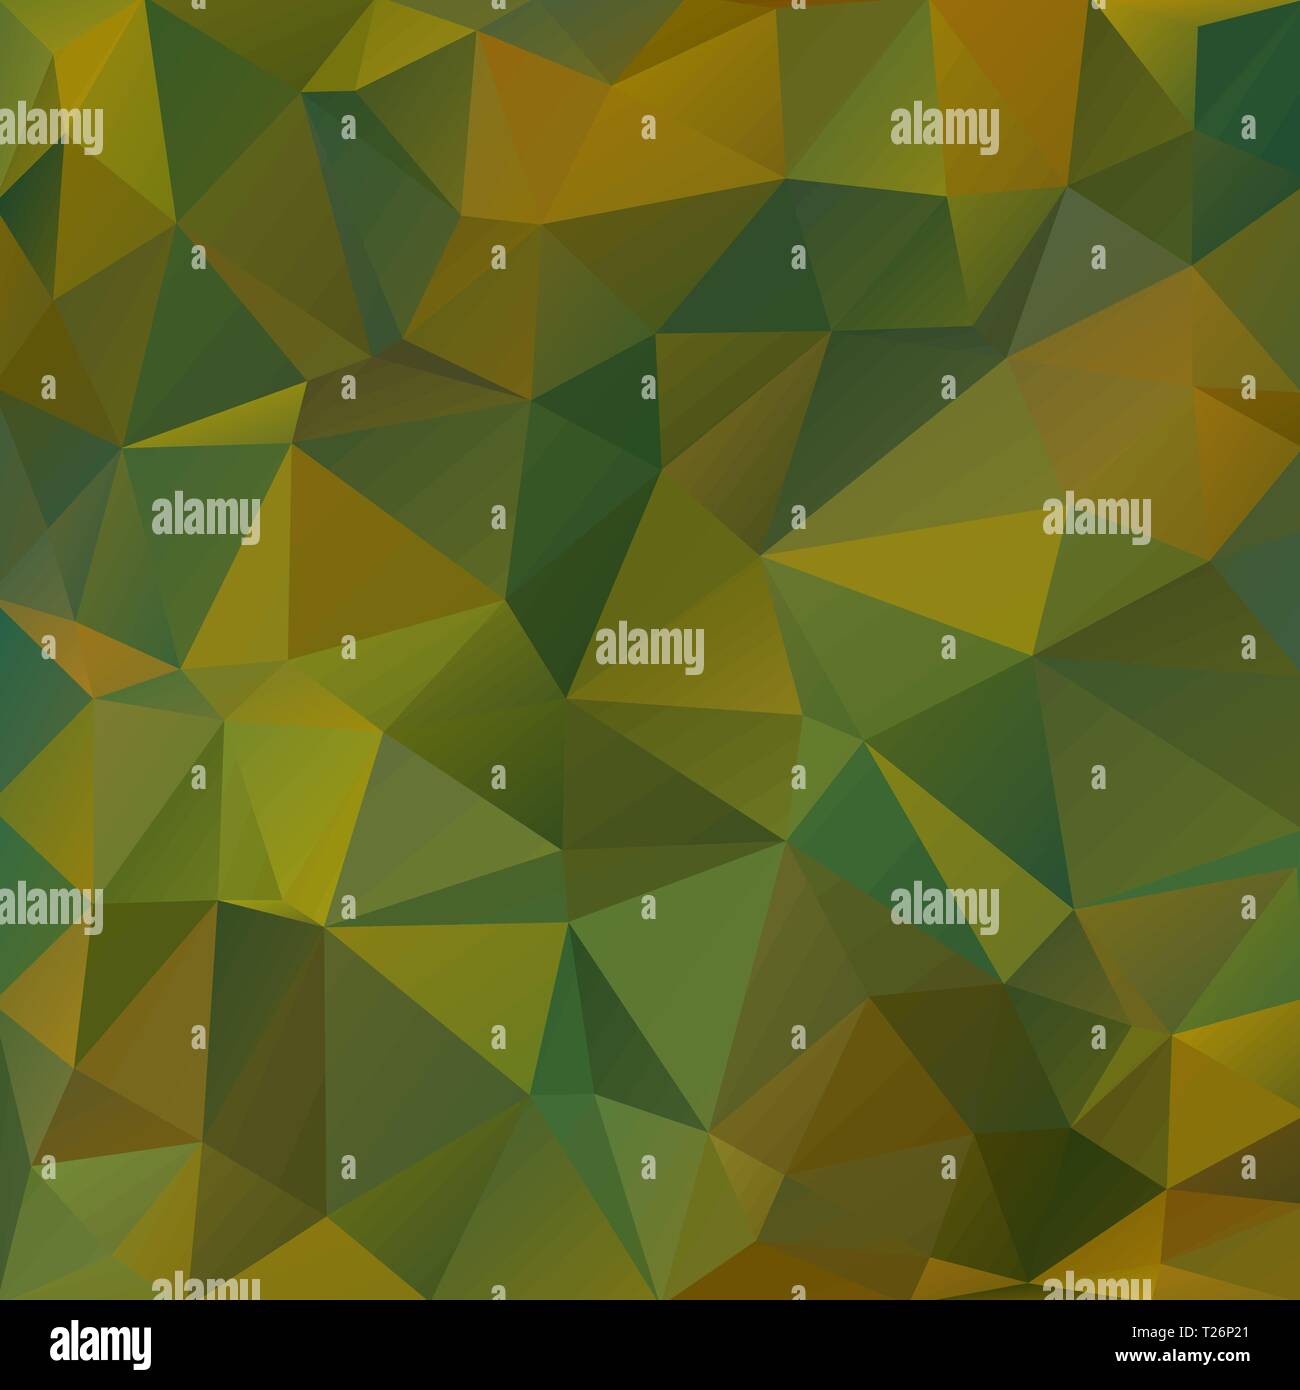 Square warm sand, green background of abstract triangles Stock Vector